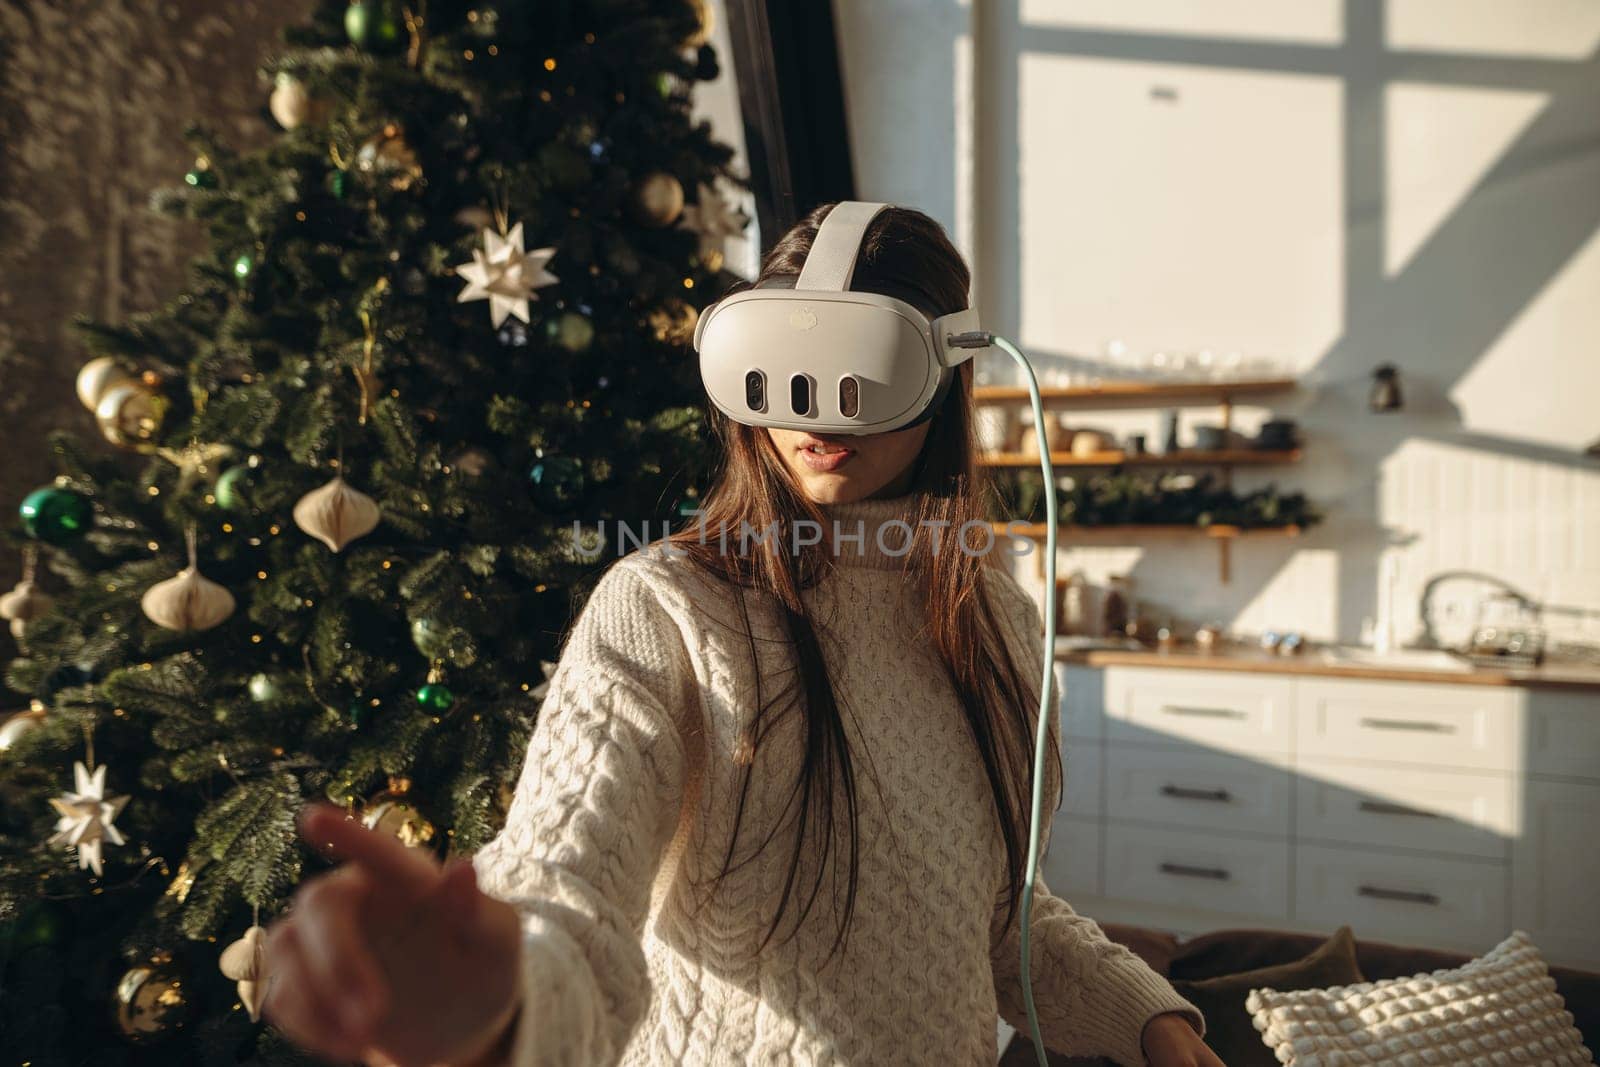 An enchanting portrait of a girl with a VR headset, set against the festive scene of a Christmas tree. High quality photo